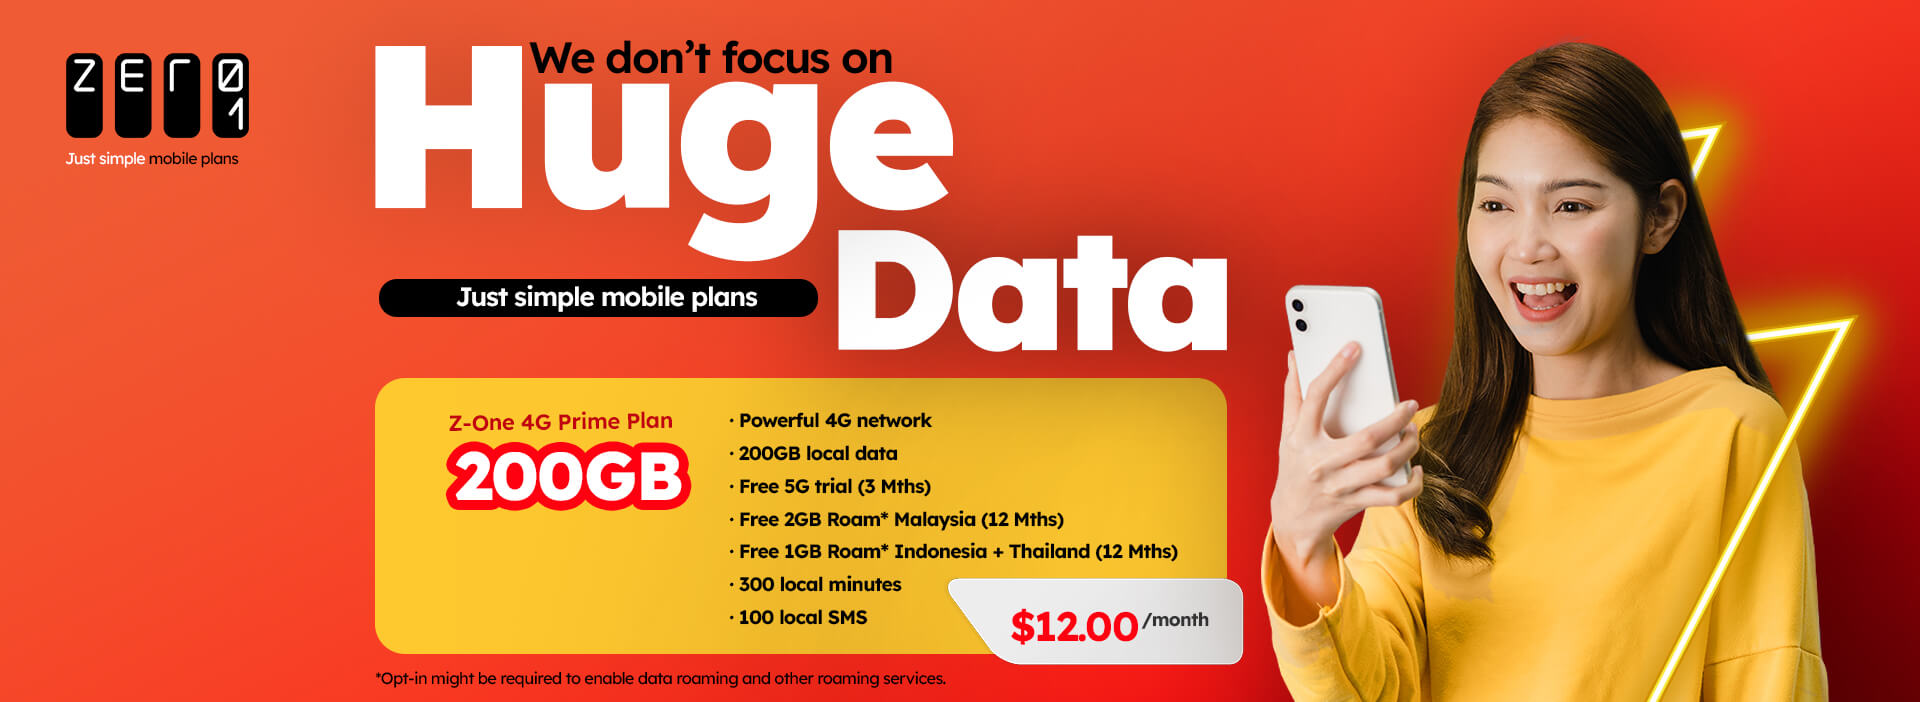 Unbeatable Connectivity and Value with the Z-One 4G Prime plan